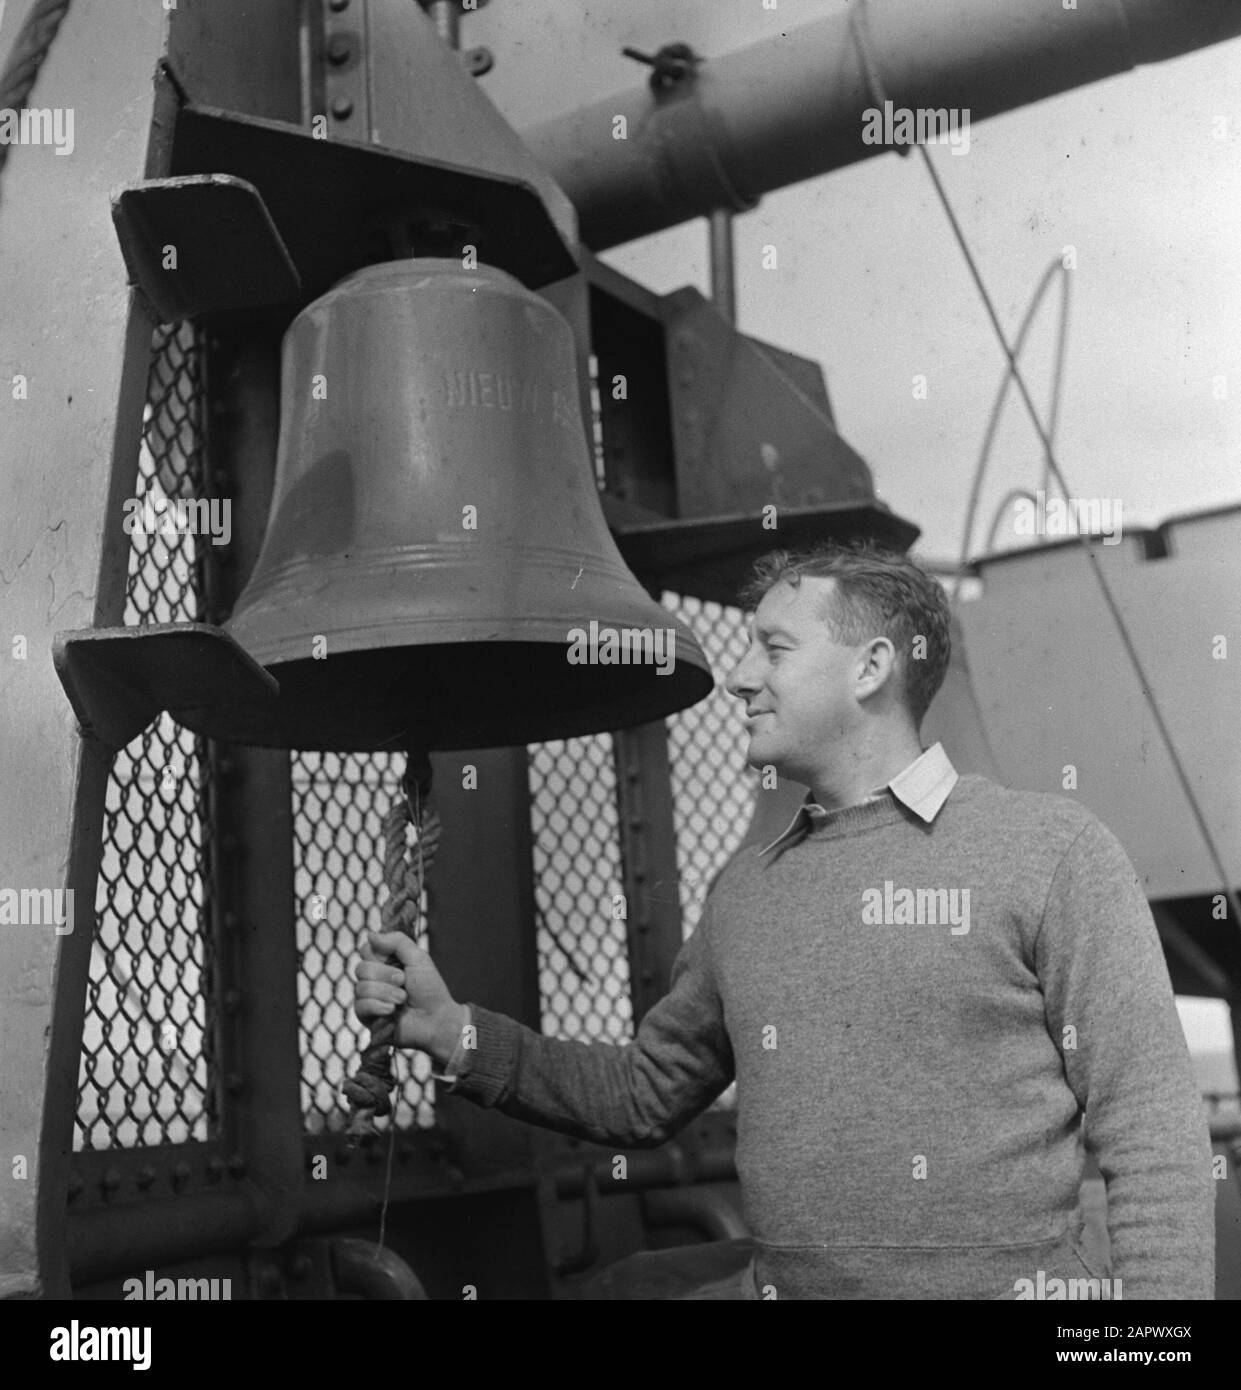 MN [Merchant Navy]/Anefo London series  On a Dutch passenger ship in service for troop transport. Man by ship bell (with inscription New...] Date: May 1944 Location: Canada Keywords: crew, merchant fleets, navy, passenger ships, ships, World War II Stock Photo